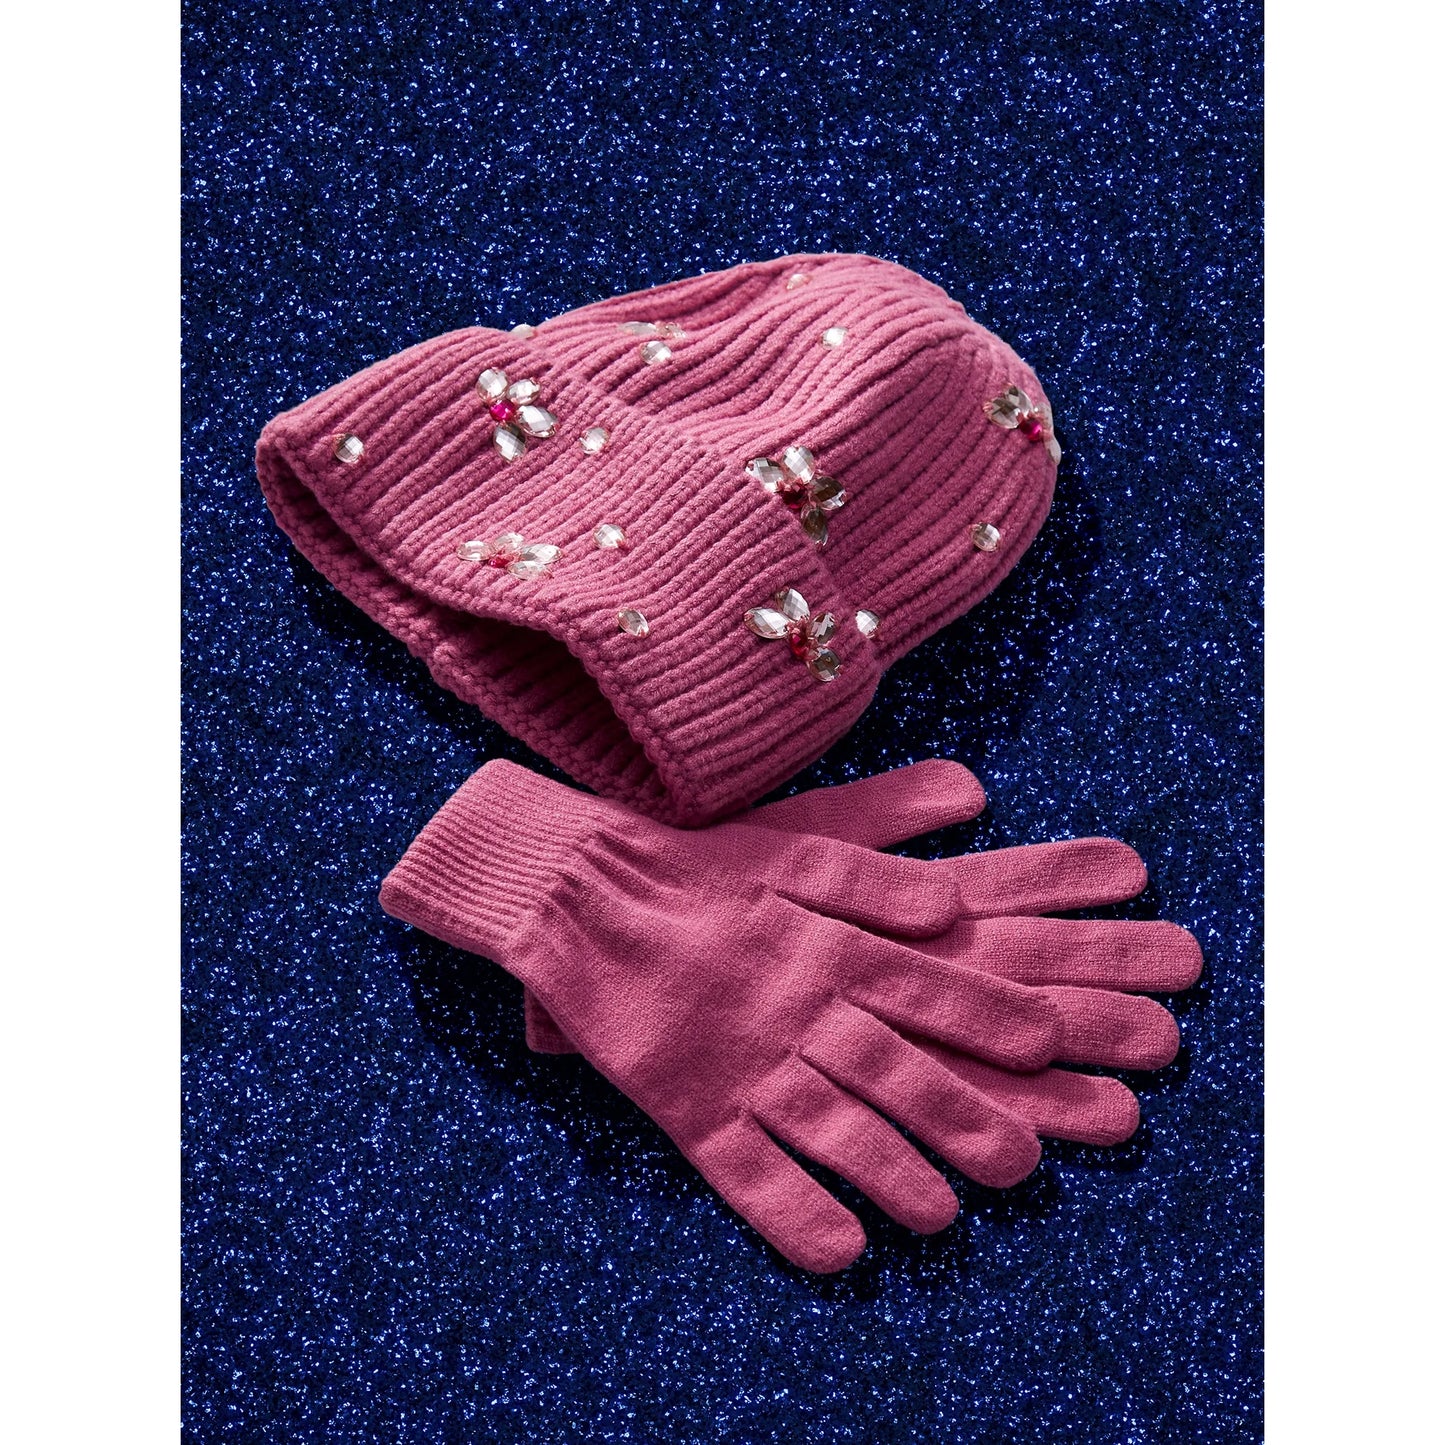 Women's Cuffed Beanie With Rhinestones And Magic Gloves, 2-Piece Gift Set Black - ZB052